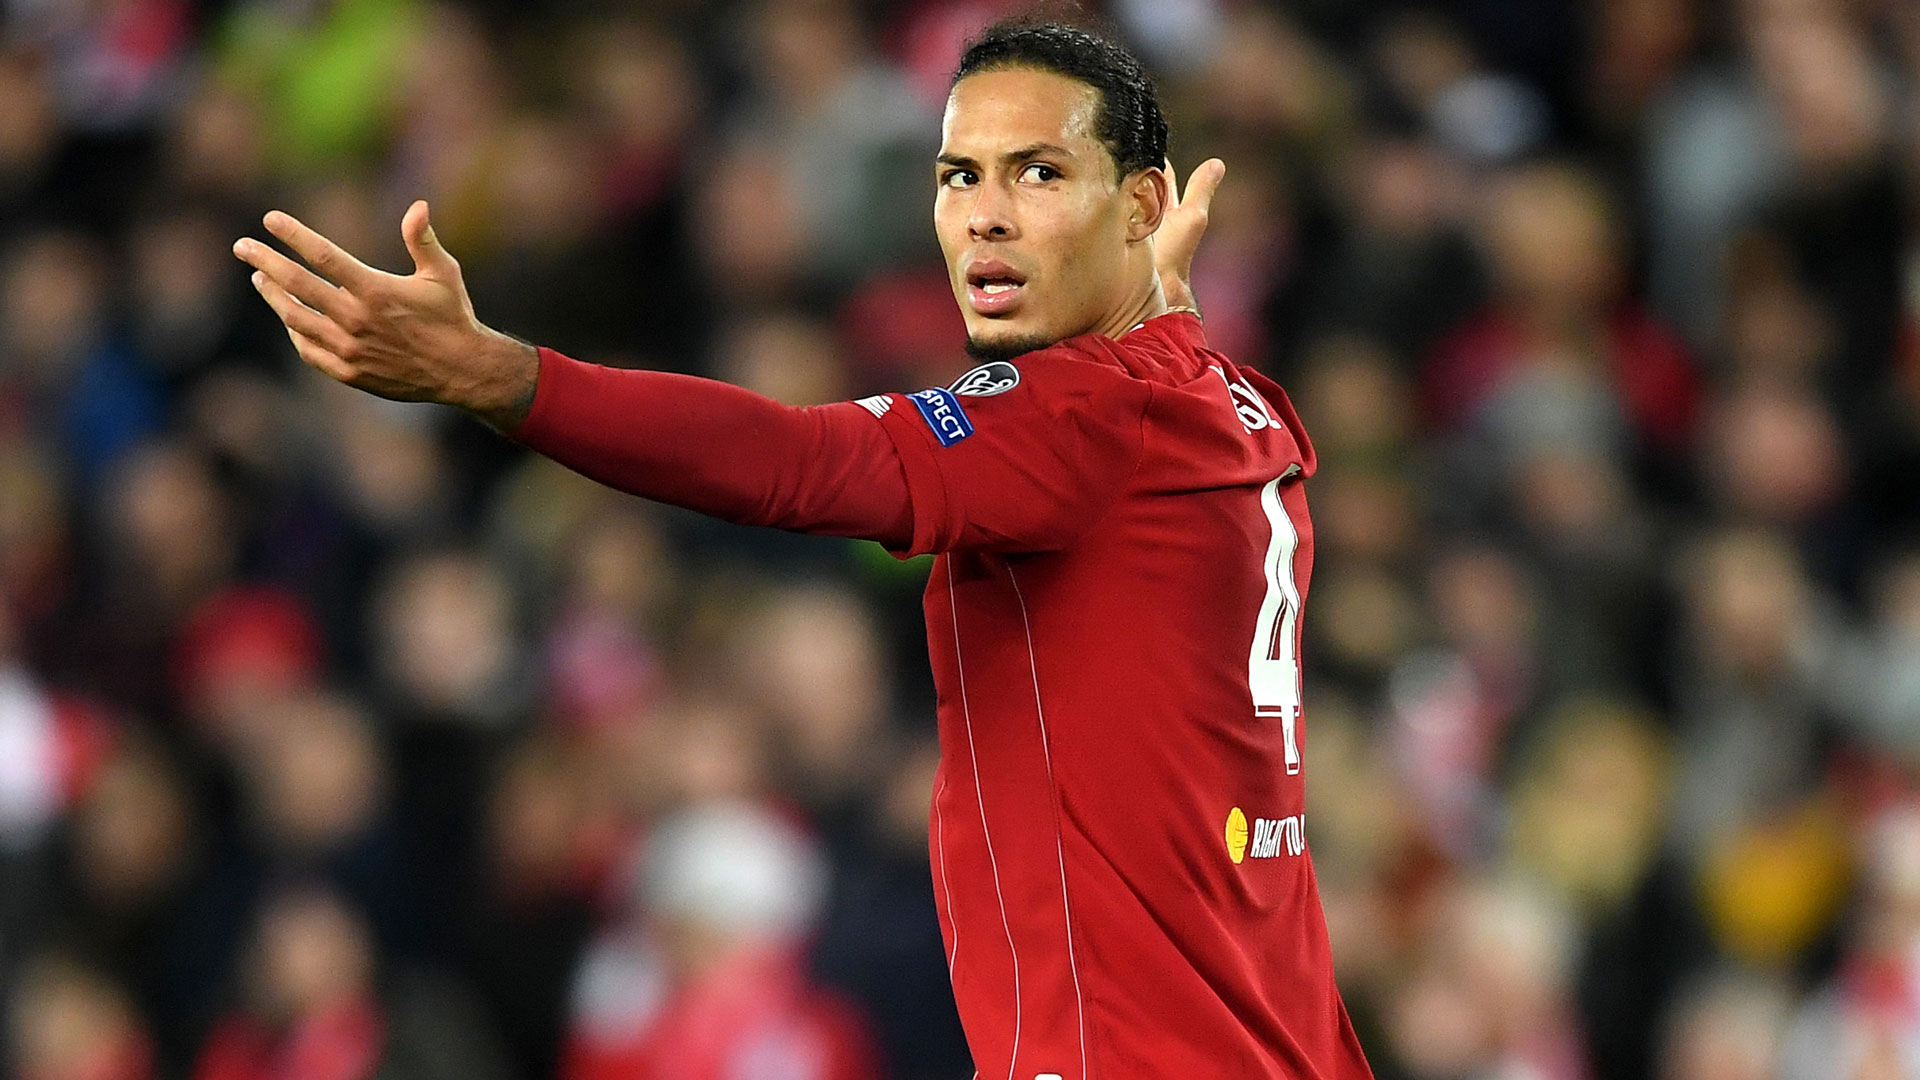 Liverpool showcased their quality during a tricky win away at Salzburg, according to Virgil van Dijk.